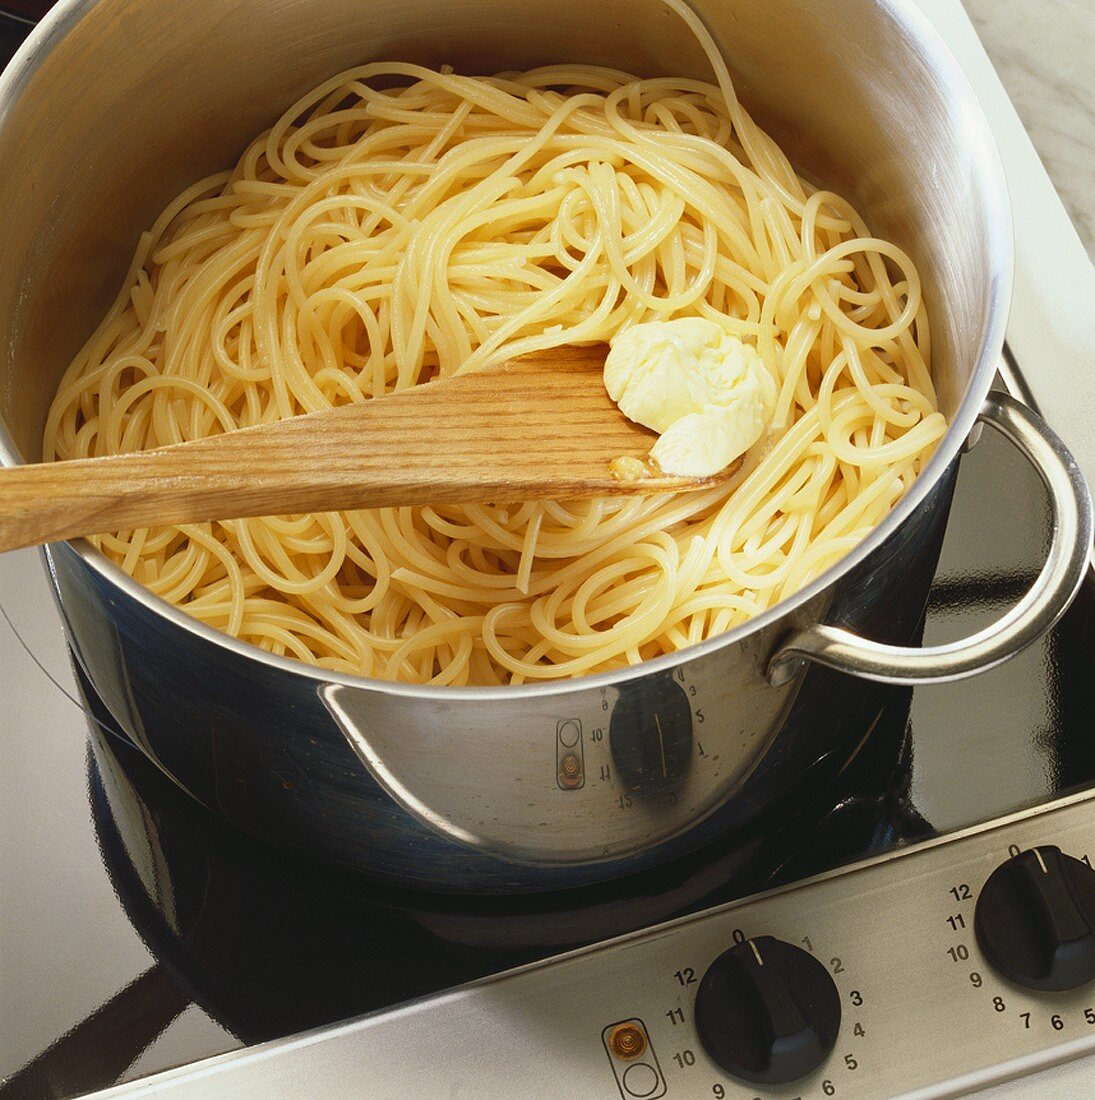 Putting butter on cooked pasta